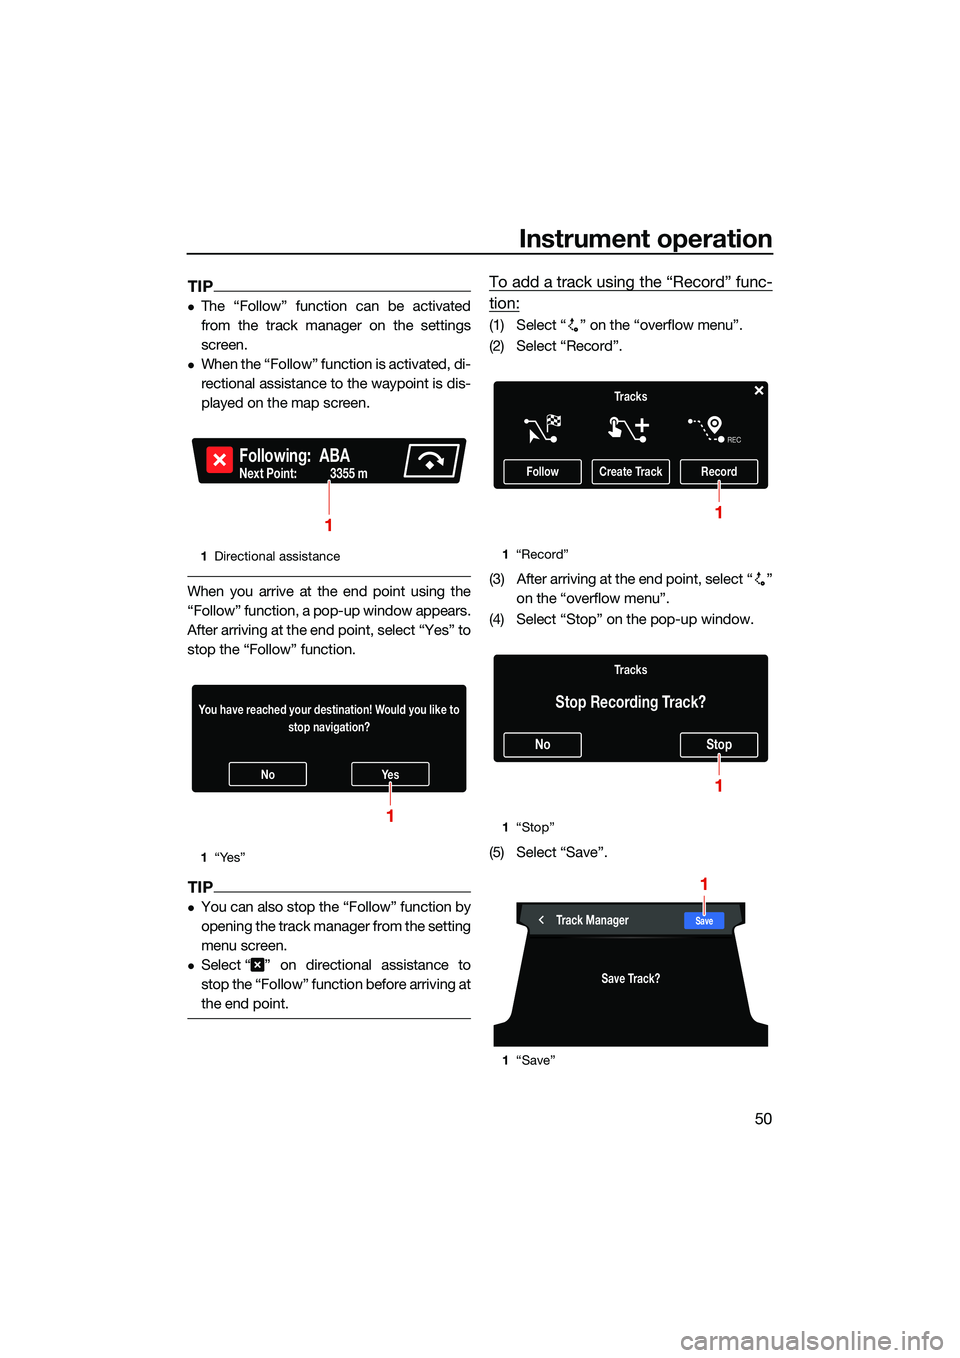 YAMAHA FX SVHO 2022  Owners Manual Instrument operation
50
TIP
The “Follow” function can be activated
from the track manager on the settings
screen.
When the “Follow” function is activated, di-
rectional assistance to the